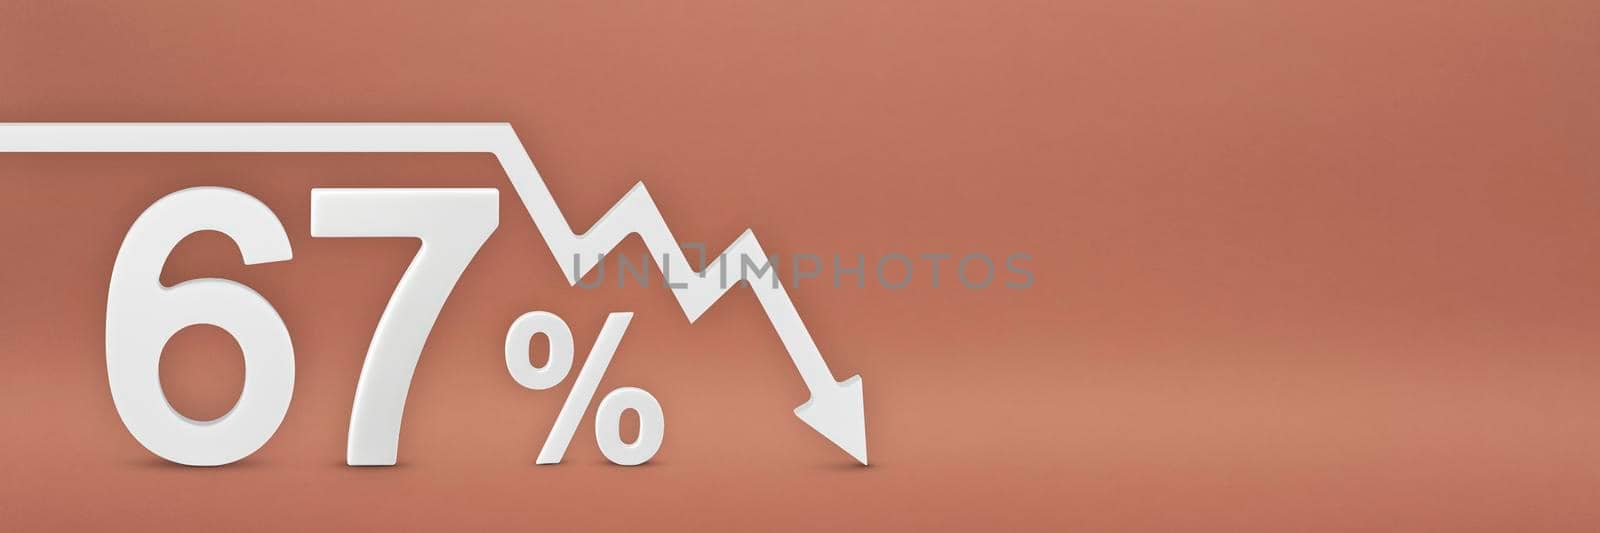 sixty-seven percent, the arrow on the graph is pointing down. Stock market crash, bear market, inflation.Economic collapse, collapse of stocks.3d banner,67 percent discount sign on a red background